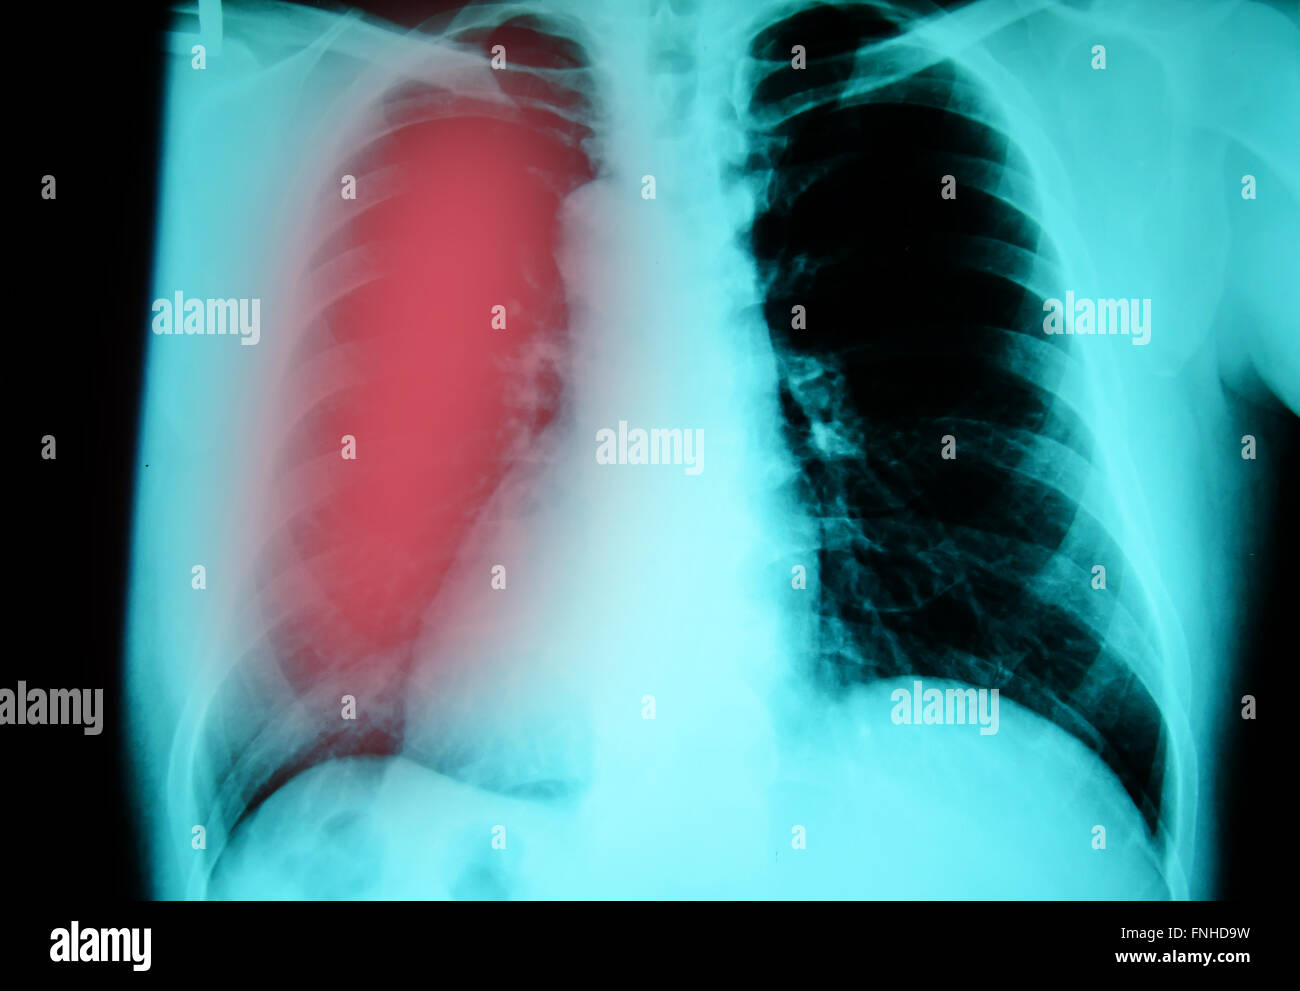 chest x-ray examination for diagnosis Pulmonary tuberculosis infection Stock Photo